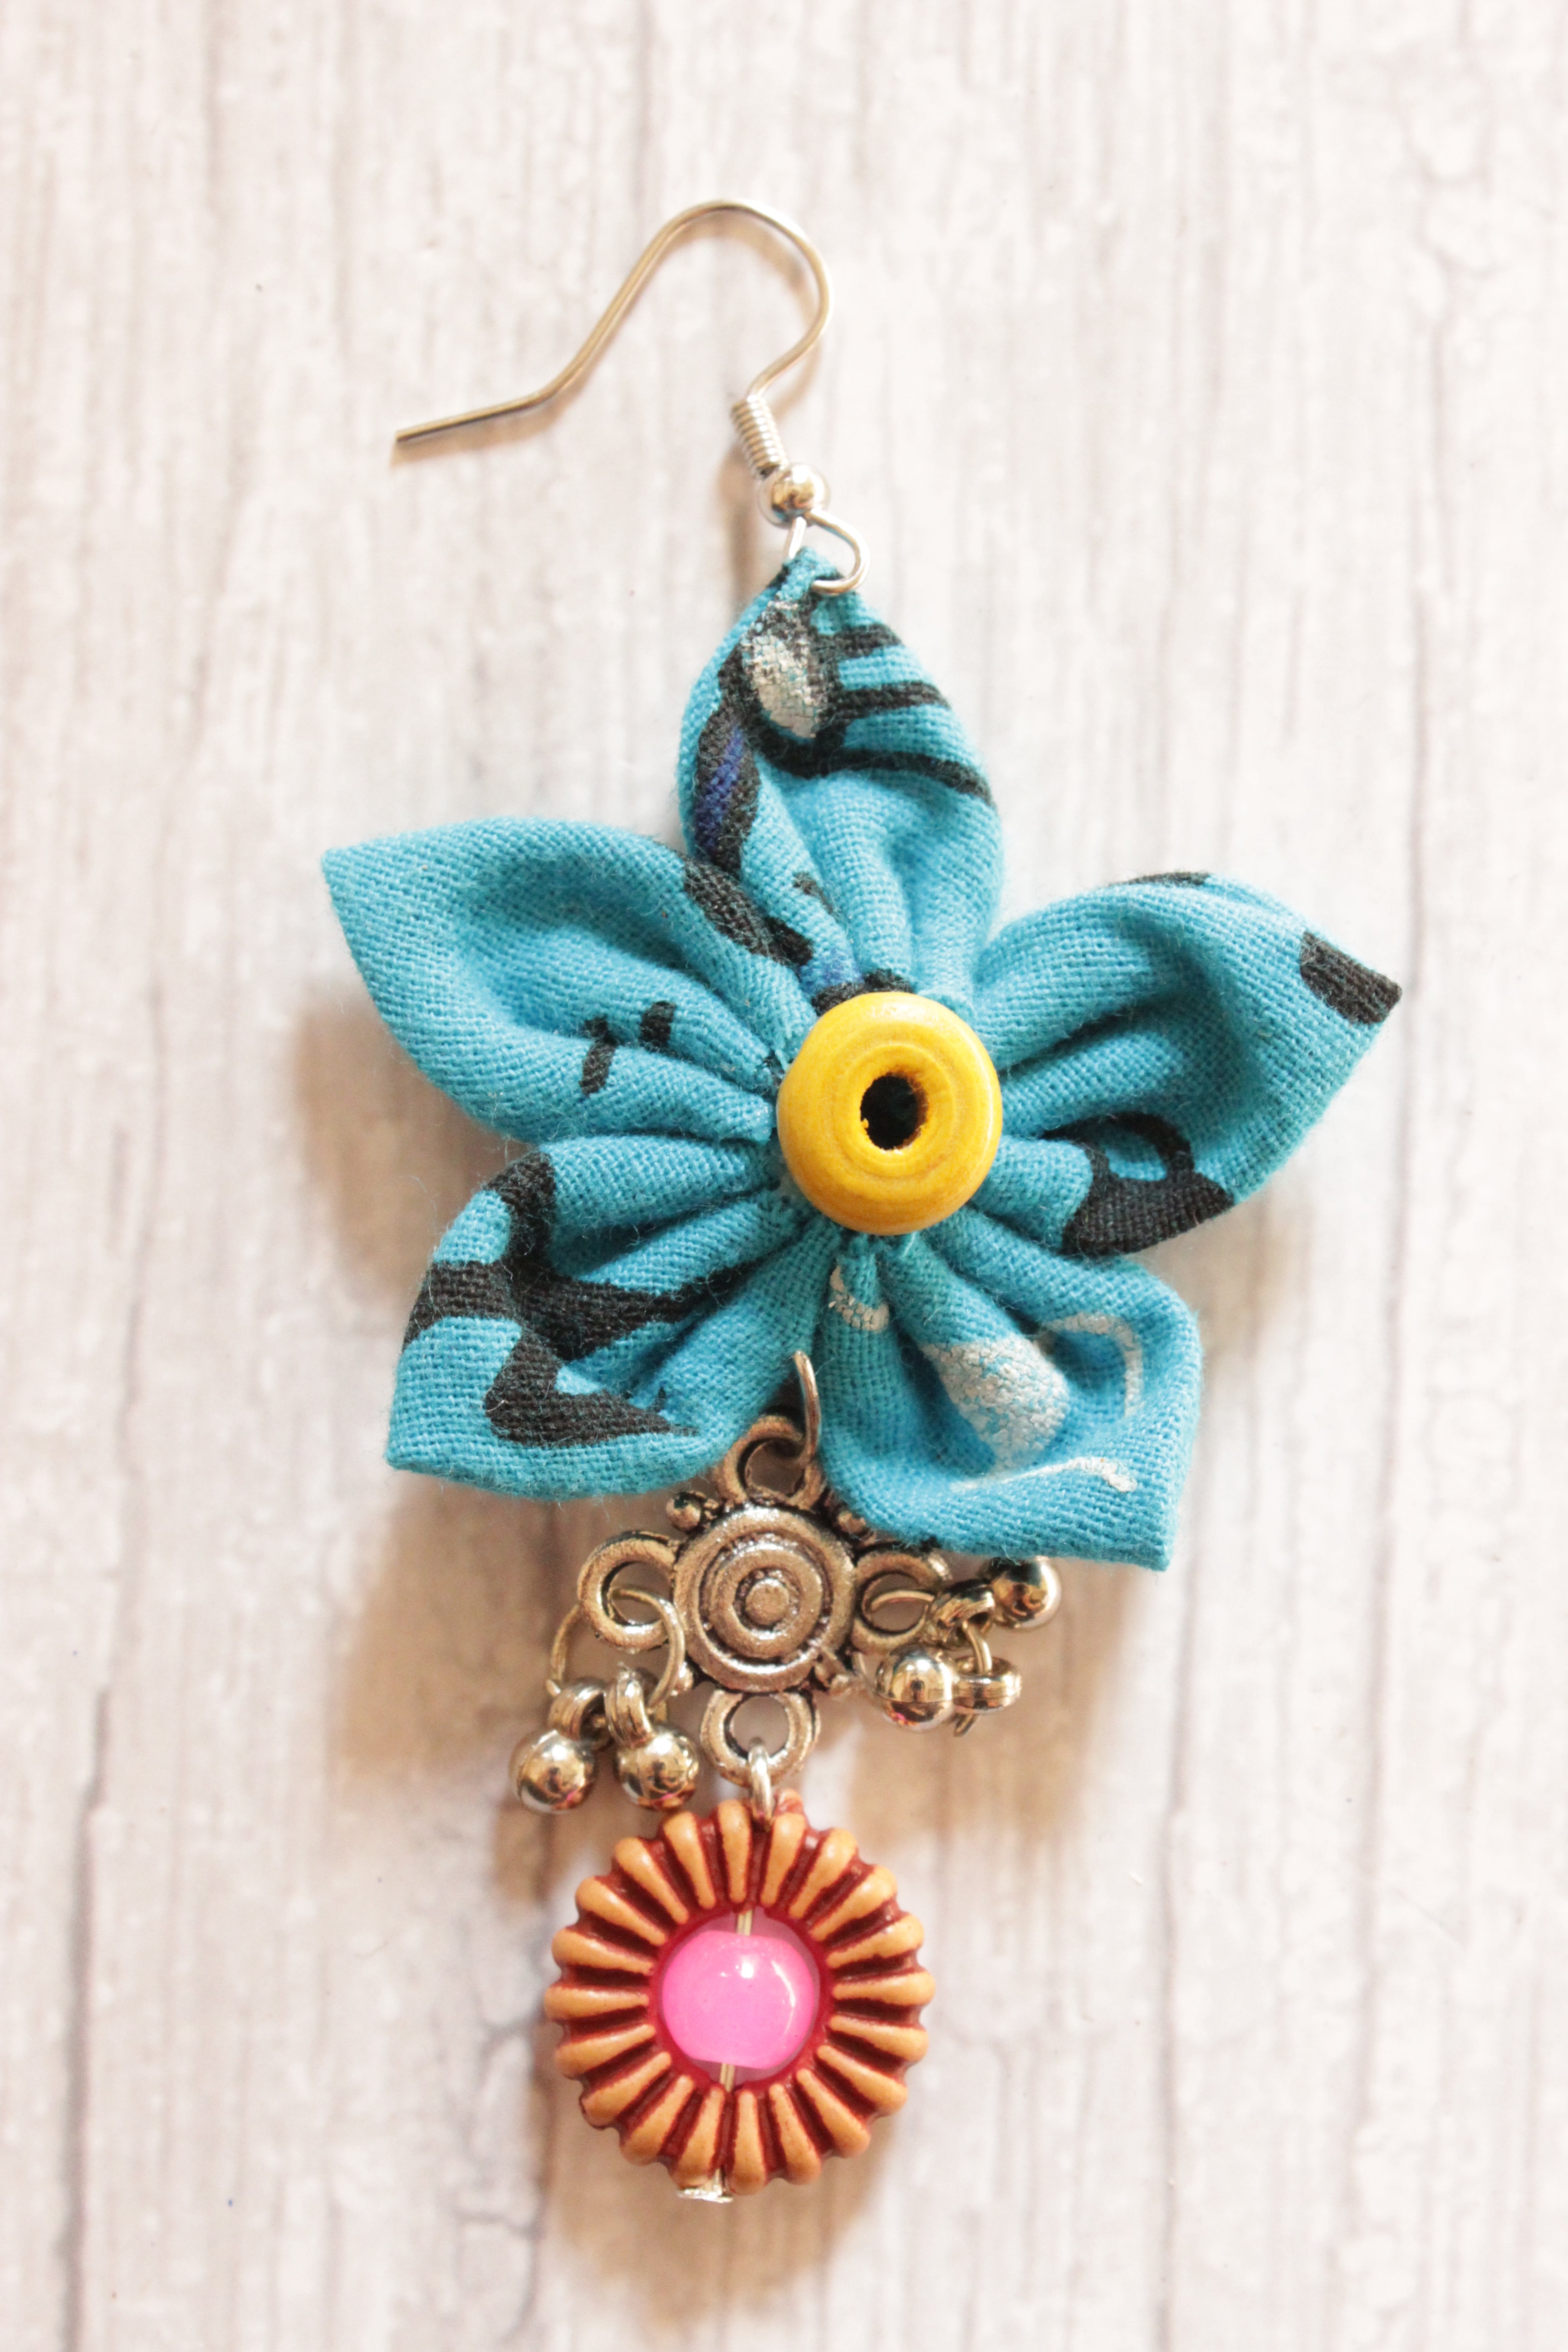 Handmade Turquoise Fabric Flower Earrings Accentuated with Wooden Flower Embellishment